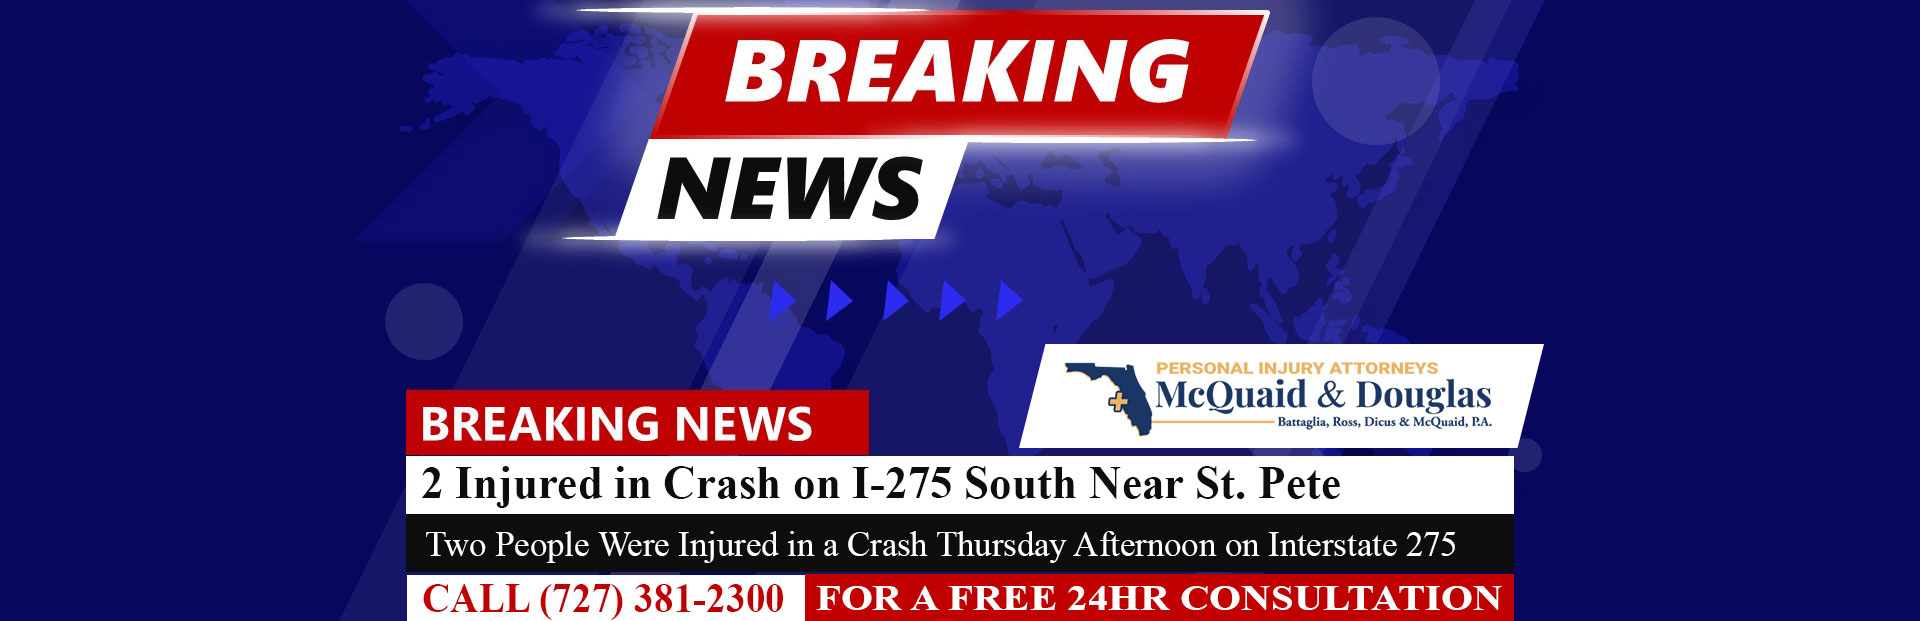 [06-28-24] 2 Injured in Crash on I-275 South Near St. Pete